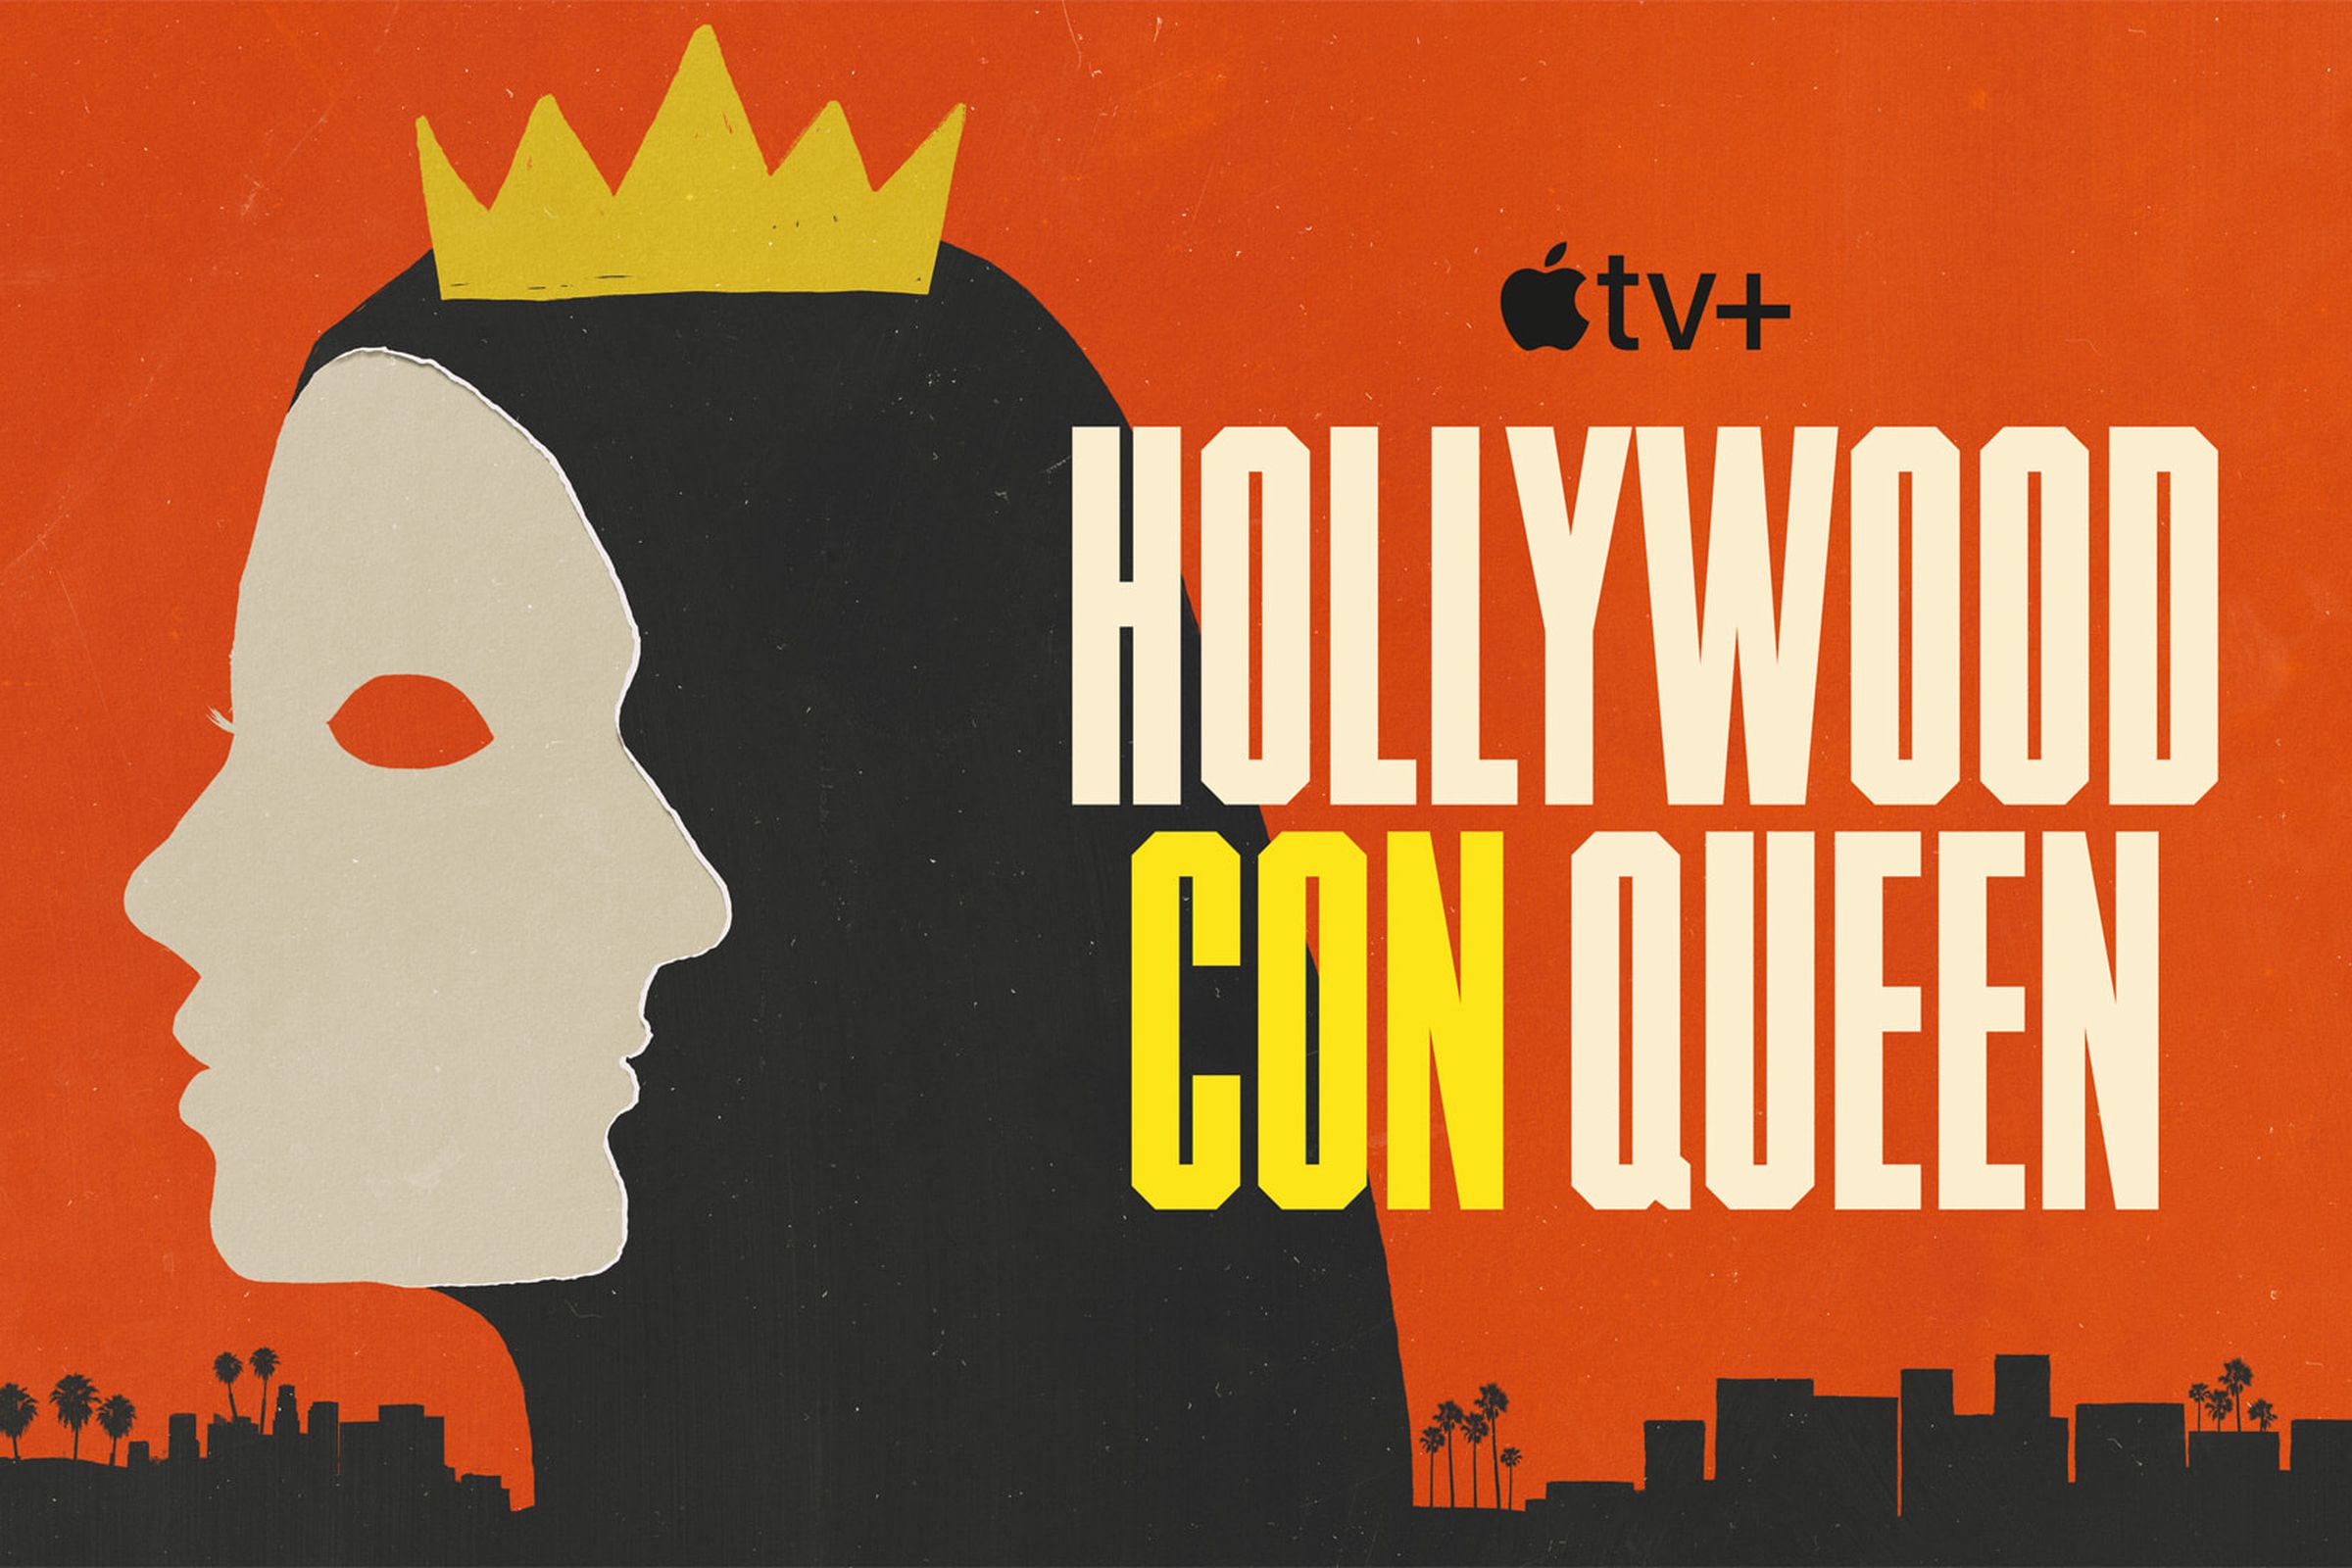 Promotional image of Hollywood Con Queen, showing a two-faced illustration